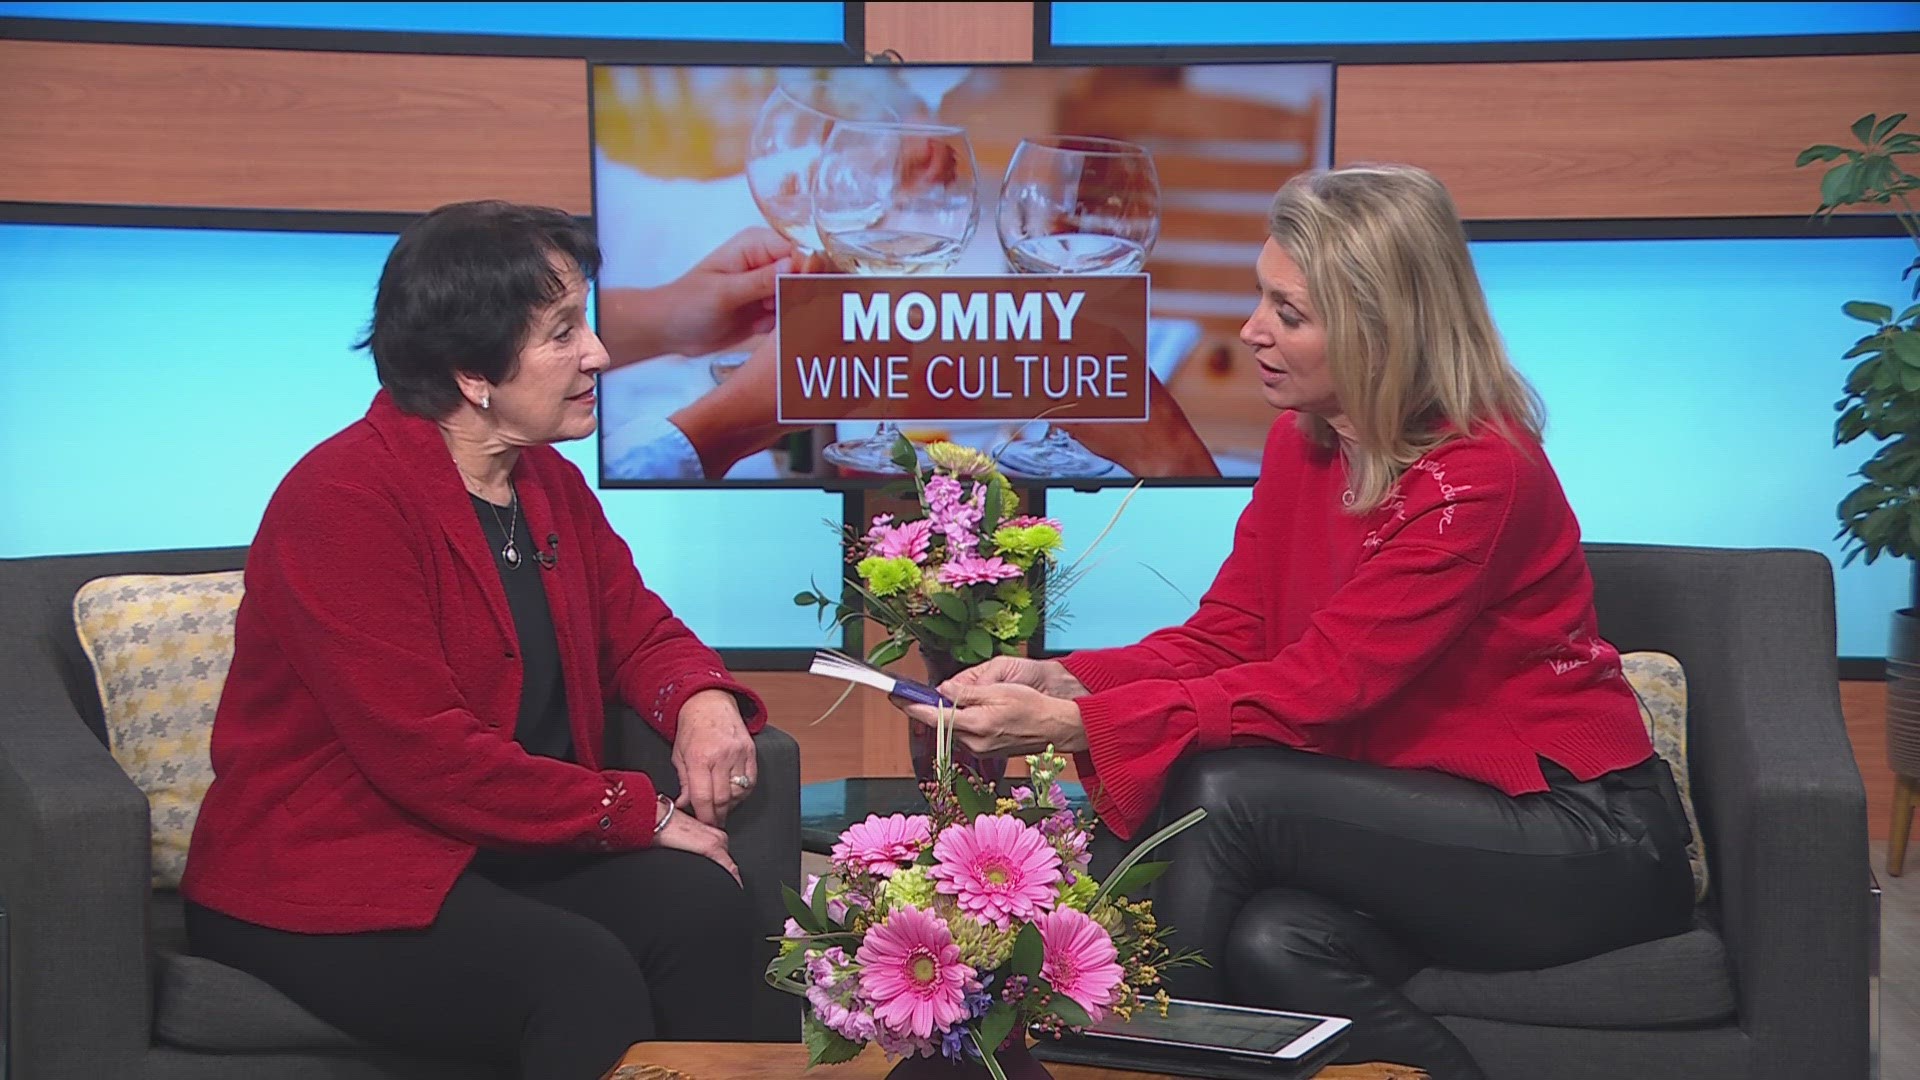 Dr. Marti Erickson, co-host of the Mom Enough podcast, joined KARE 11 Saturday to shine a light on the risks of "mommy wine culture" and ways to rise above it.